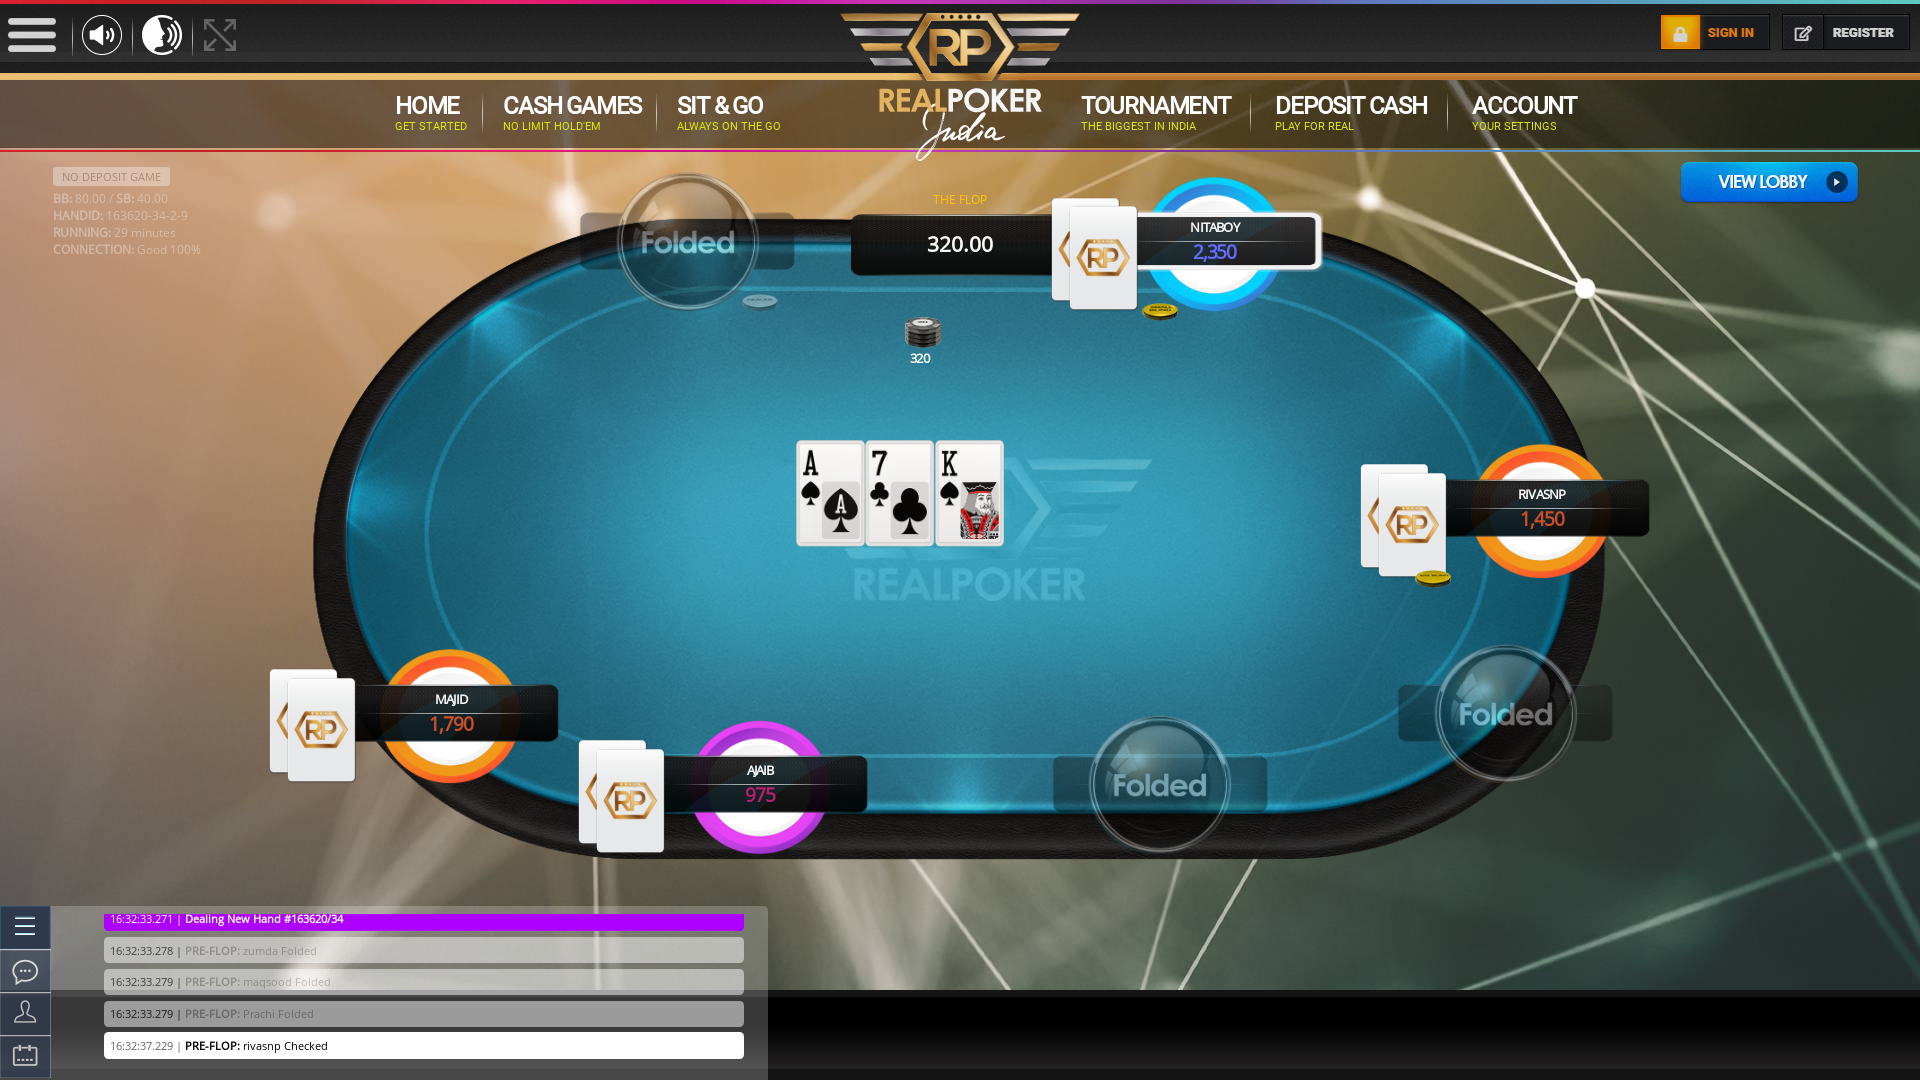 10 player poker in the 28th minute